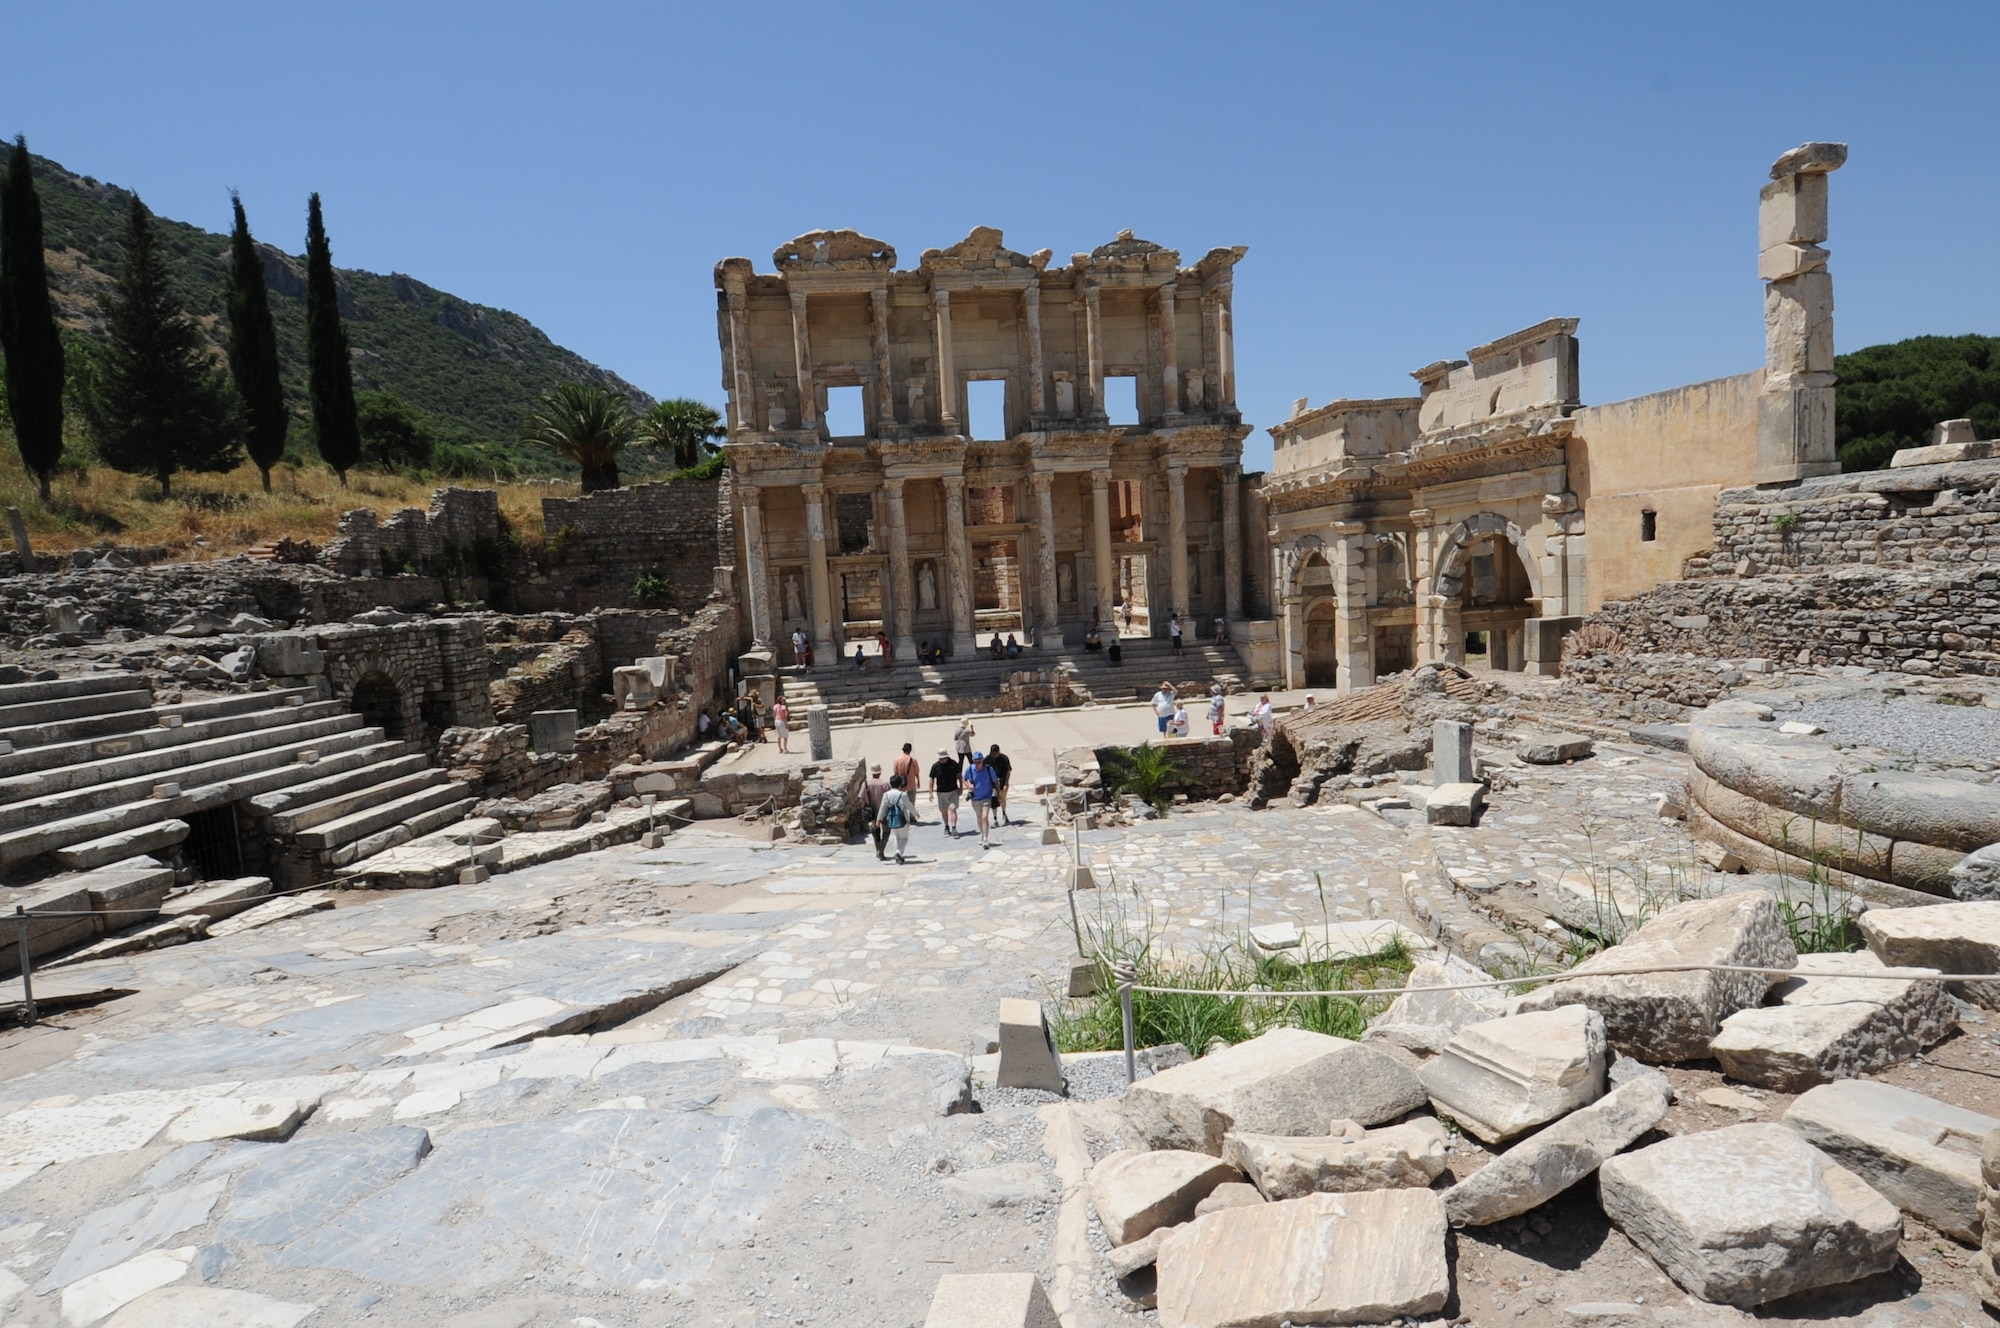 The Celsus Library, located in Ephesus, Selcuk, Turkey, was built around 117 A.D. The library was the third largest in the world in the Classical Period after the Alexandria Library in Egypt and the Pergamon Library in Anatolia.  (U.S. Air Force photo by Tech. Sgt. Valda Wilson/Released) 